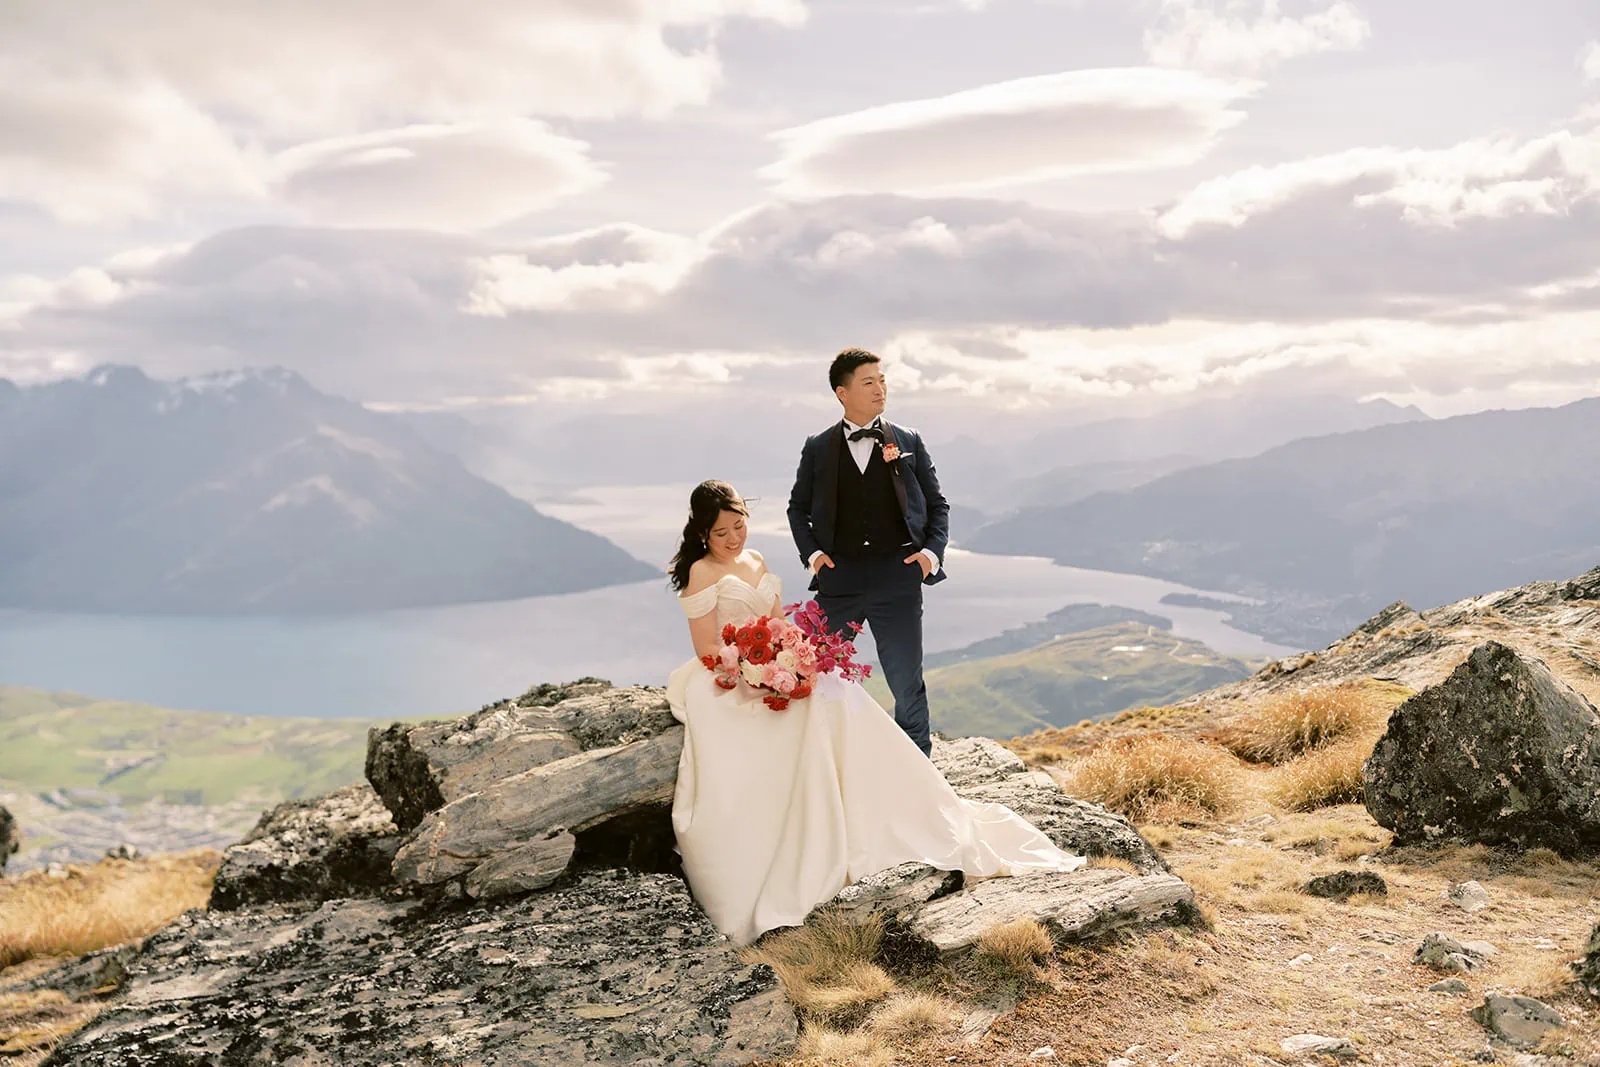 Queenstown Elopement Heli Wedding Photographer クイーンズタウン結婚式 | For their pre-wedding photoshoot, a bride and groom celebrate their love on top of a mountain overlooking stunning Lake Wanaka.